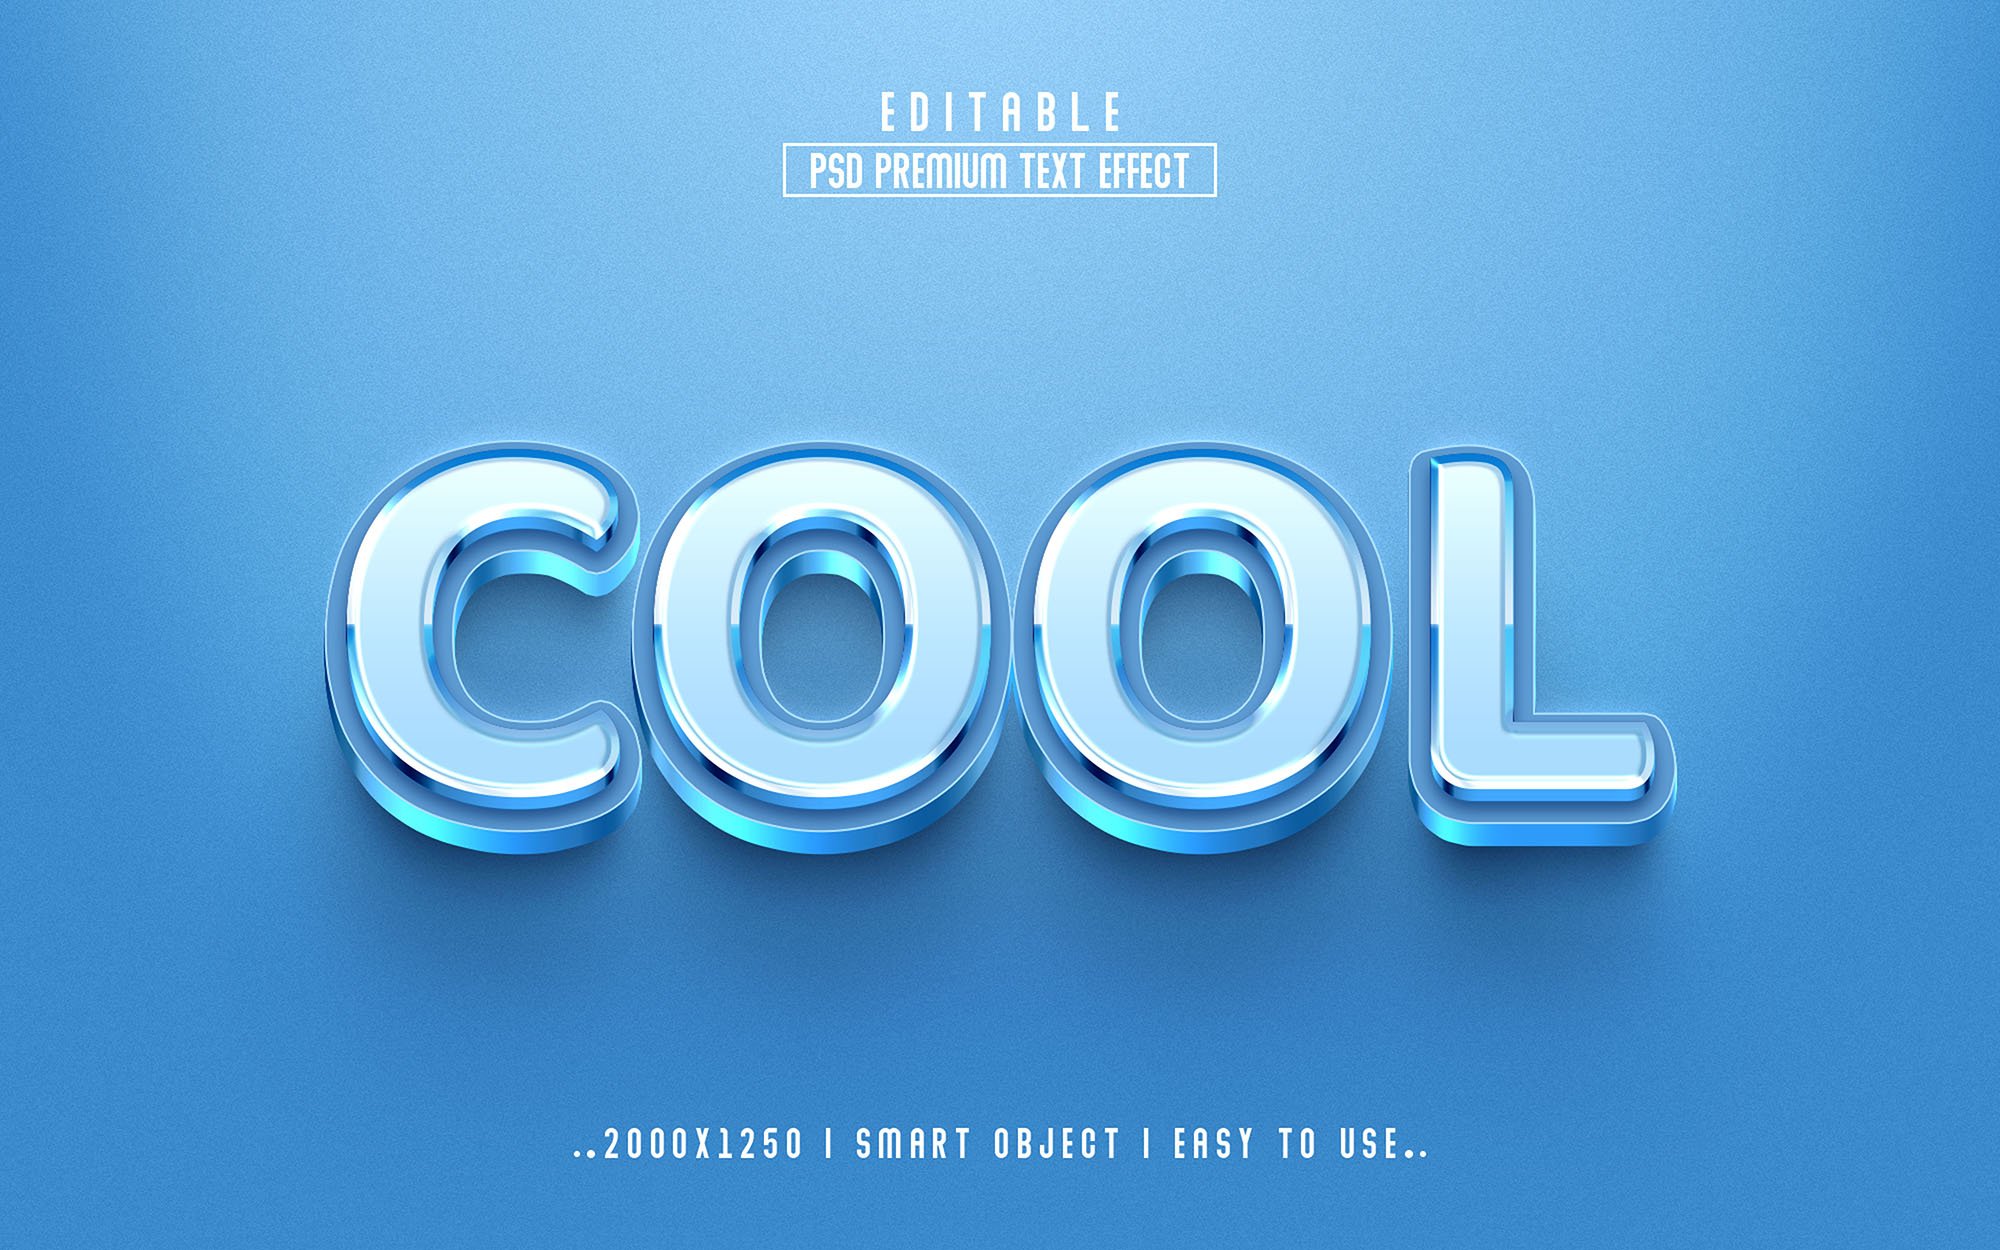 Cool 3D Editable Text Effect stylecover image.